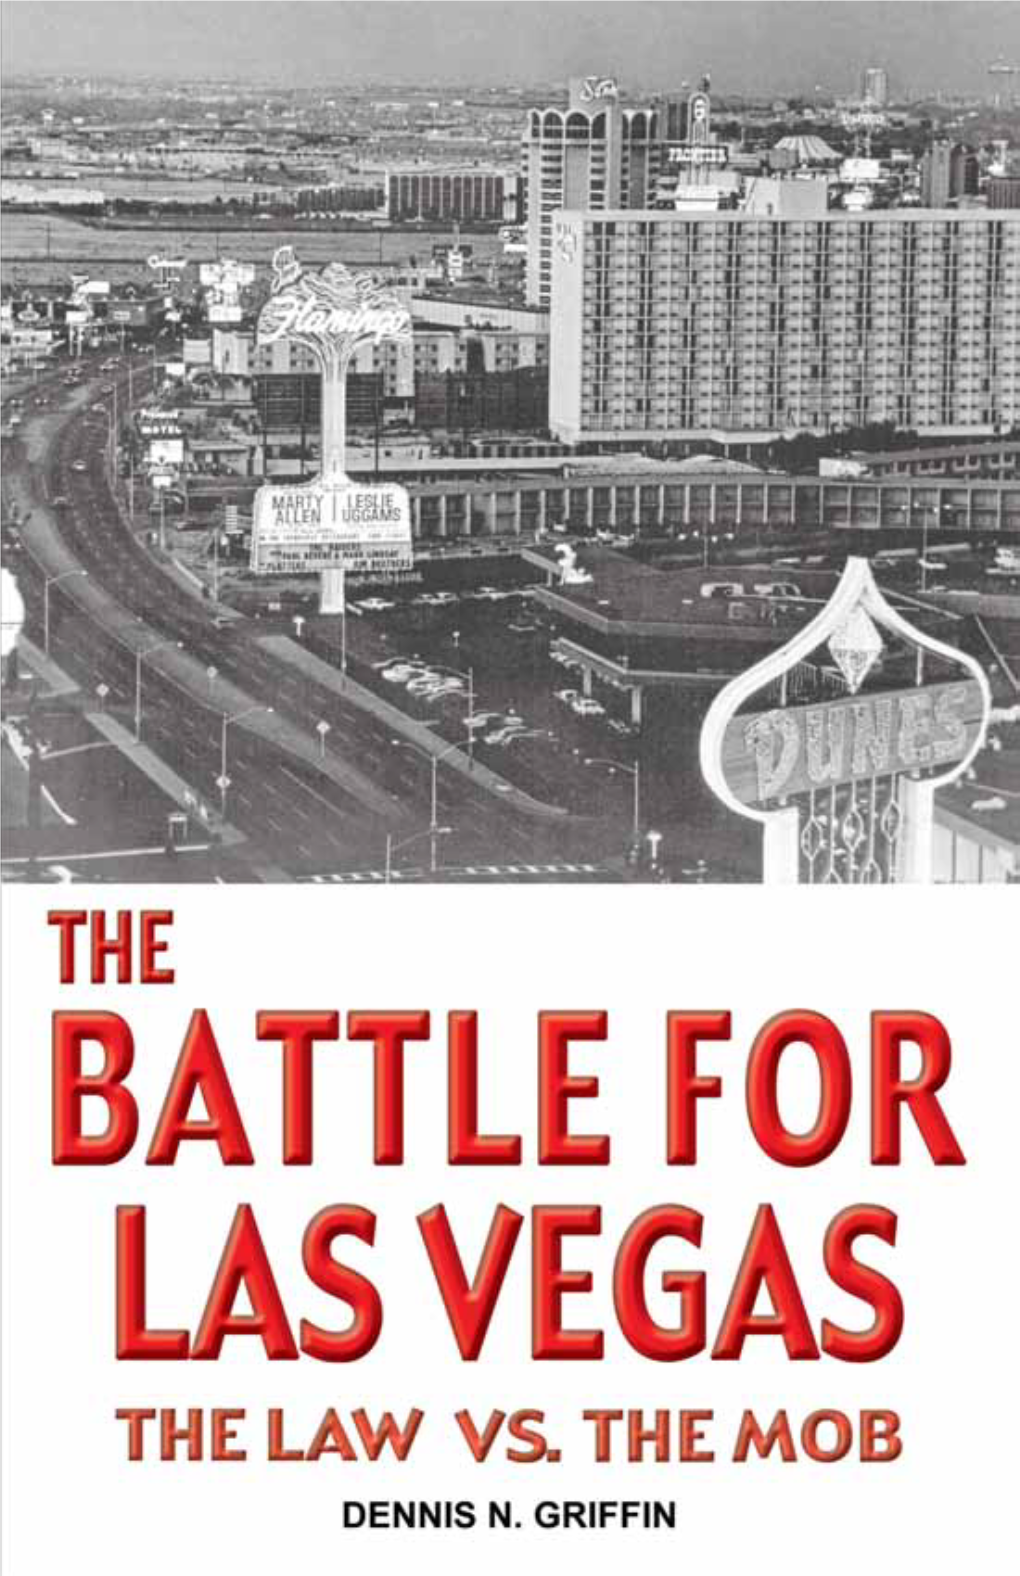 The Battle for Las Vegas, Dennis Griffin Has Added Balance by Including the Law-Enforcement Side of Things